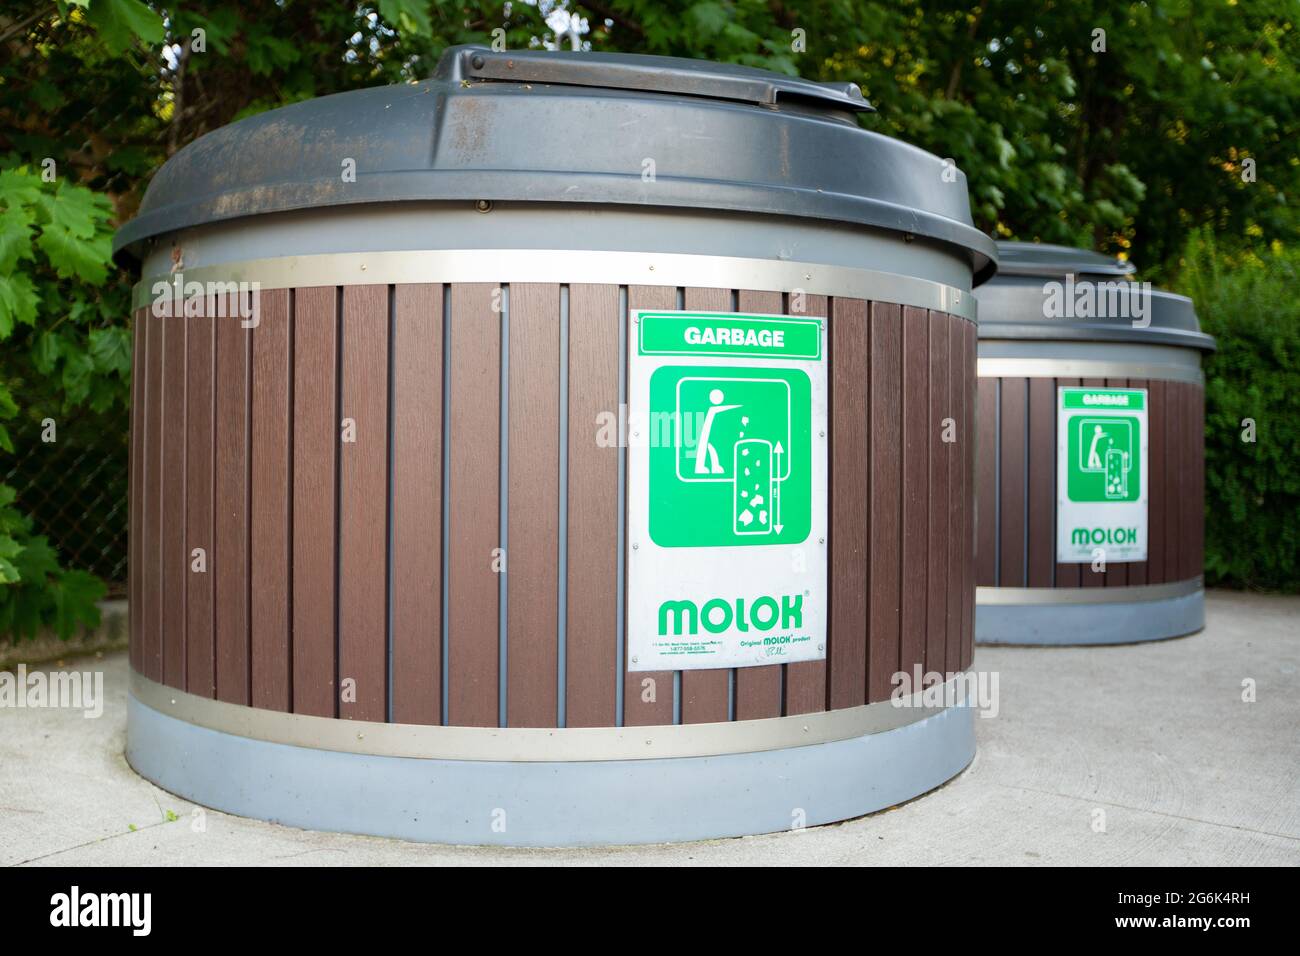 Molok North America Ltd deep waste management  garbage bins are seen under the trees in an outdoor area. Stock Photo